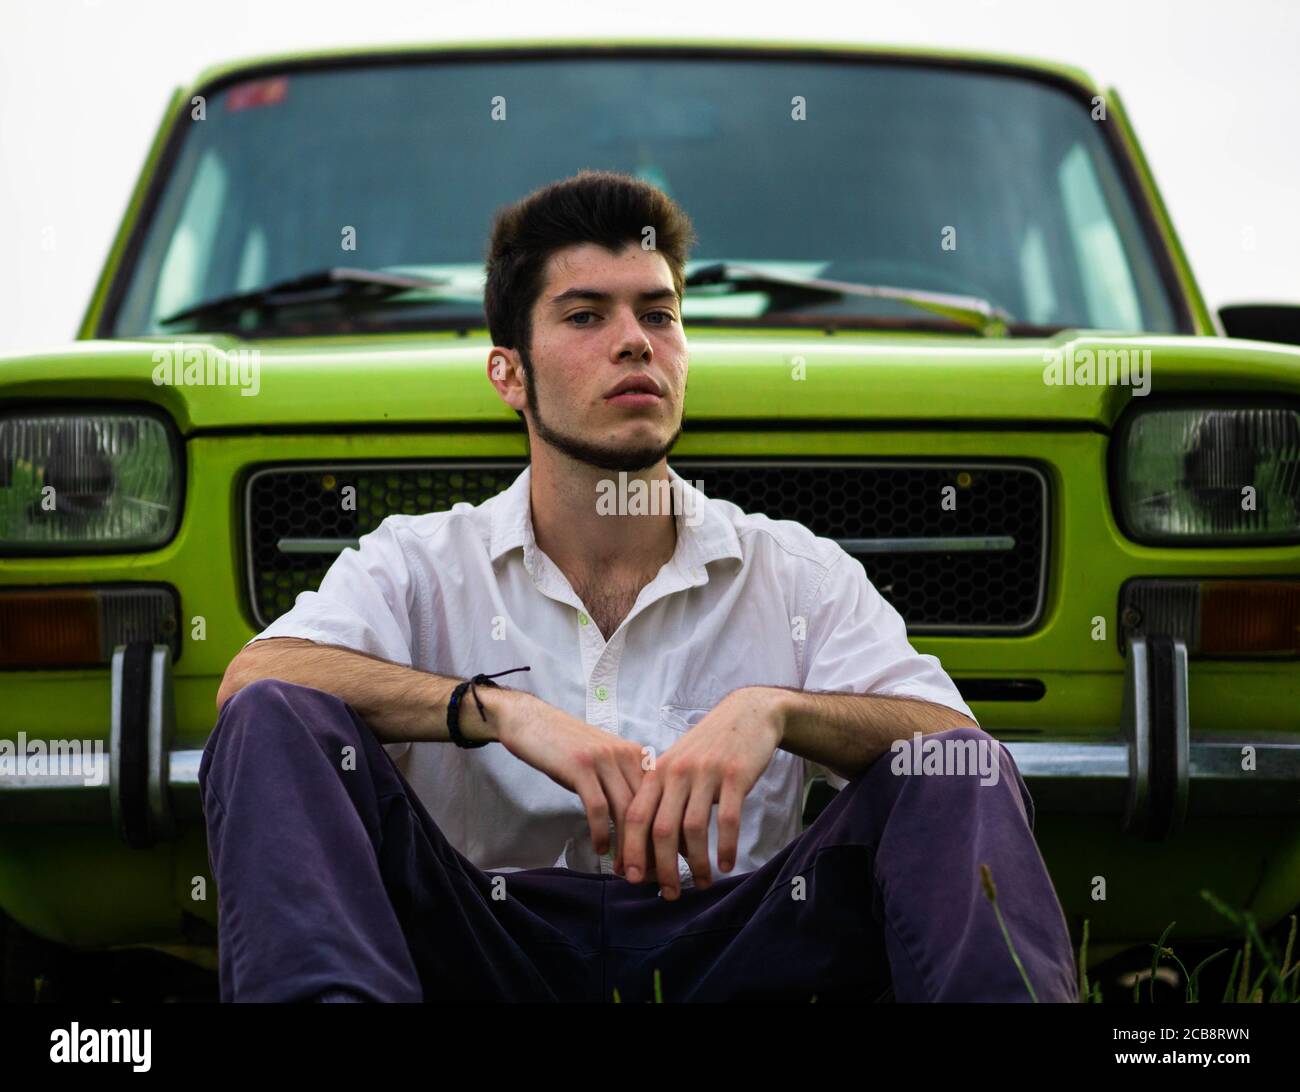 Young Caucasian man sitting near a vintage green car Stock Photo